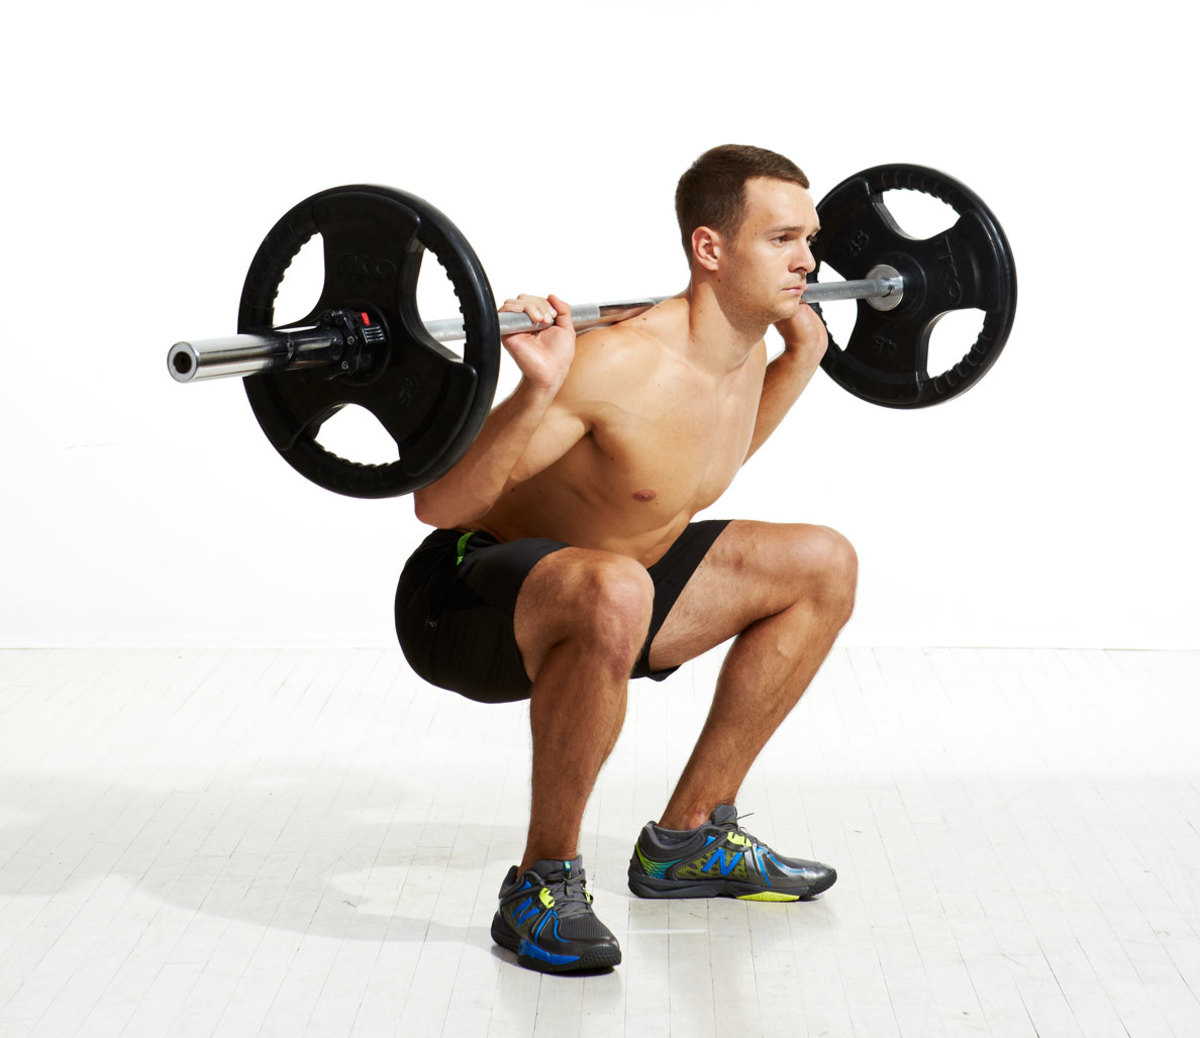 Barbell Complex 2 - Bentover rows - Squat clean - Strict press - Reverse lunges - Back squat